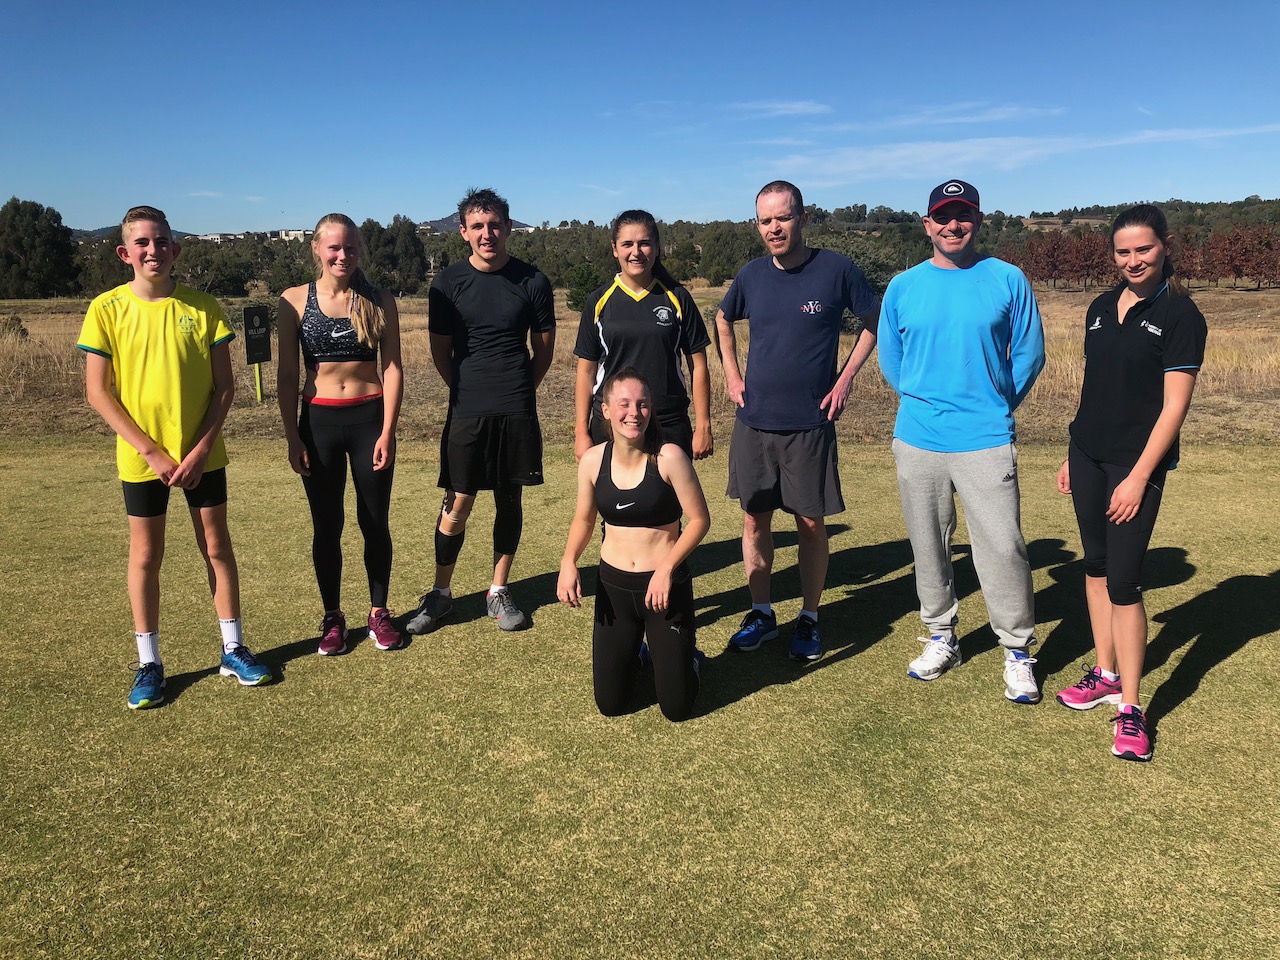 Sprint and hill running training at Stromlo in South Canberra